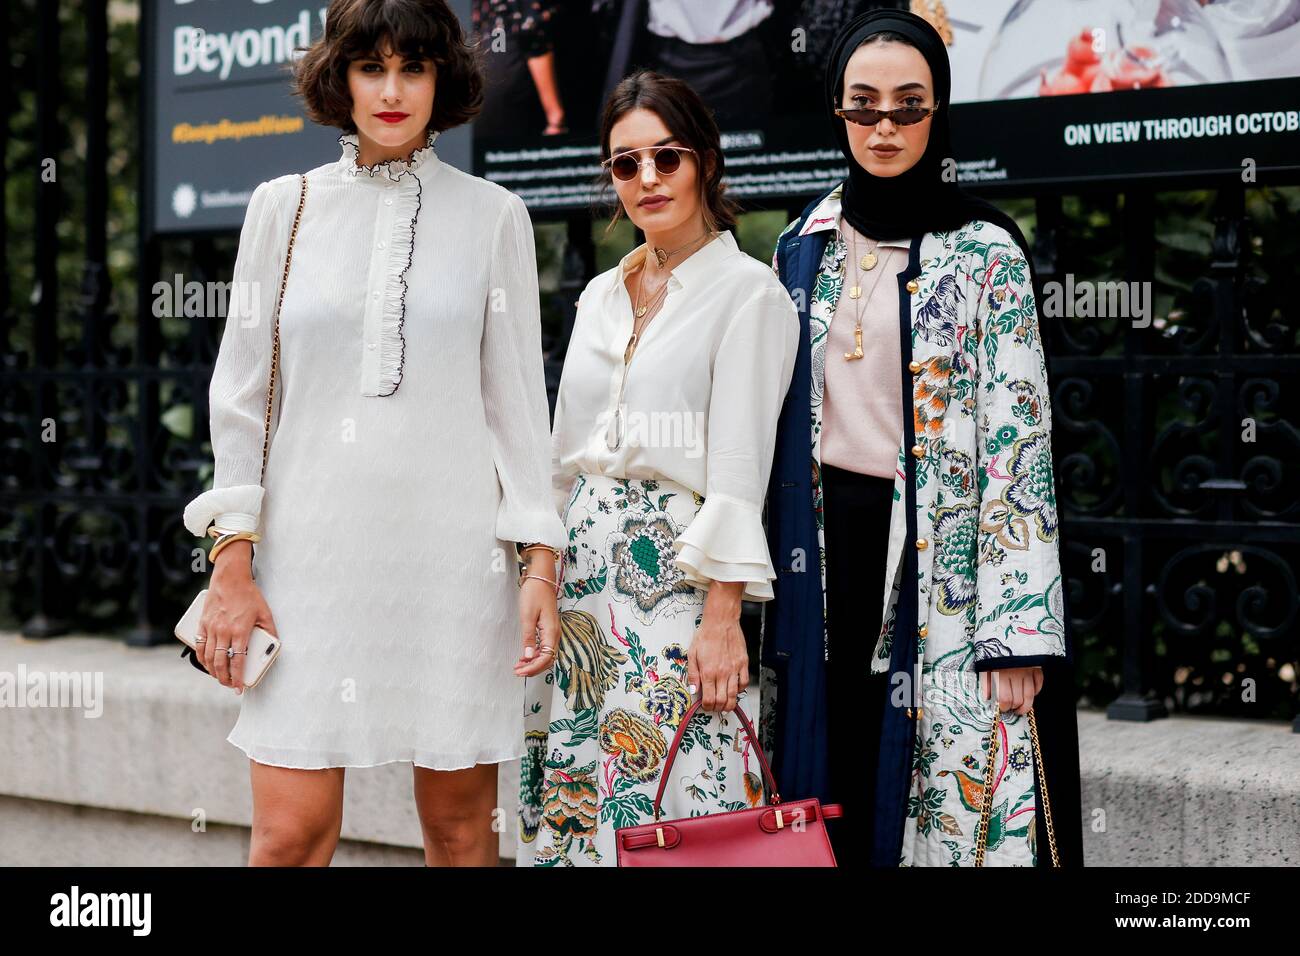 Street style, Nour Arida, Karen Wazen Bakhazi and Leena Al Ghouti arriving at Tory Burch spring summer 2019 ready-to-wear show, held at Cooper Hewitt, in New York City, NY, USA, on September 7, 2018. Photo by Marie-Paola Bertrand-Hillion/ABACAPRESS.COM Stock Photo